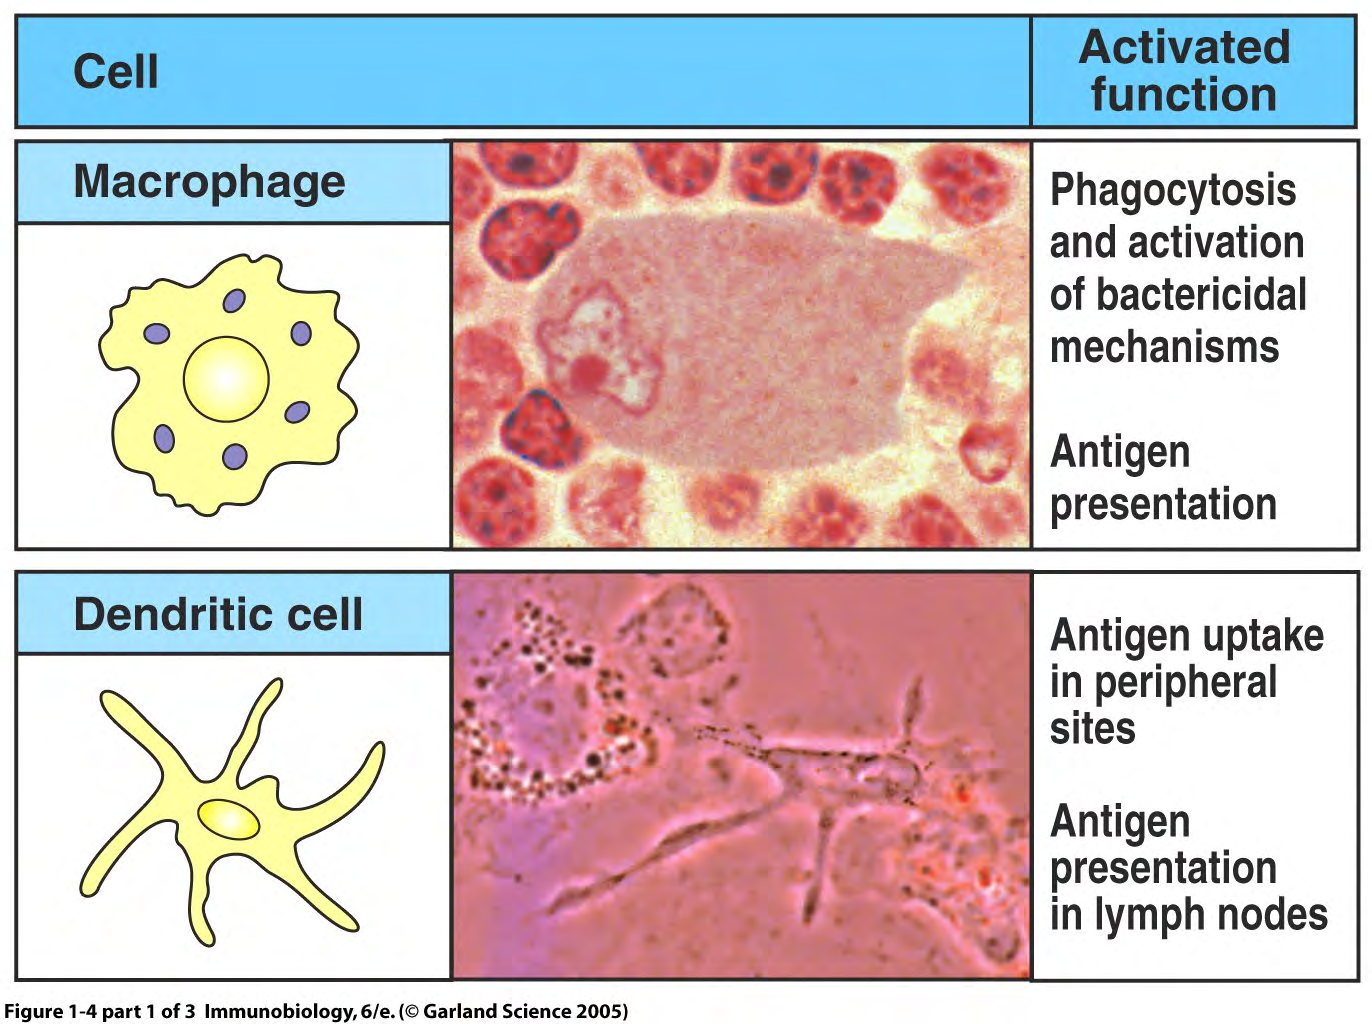 THE ANTIGEN-PRESENTING CELLS OF INNATE IMMUNITY ACCESSORY and EFFECTOR